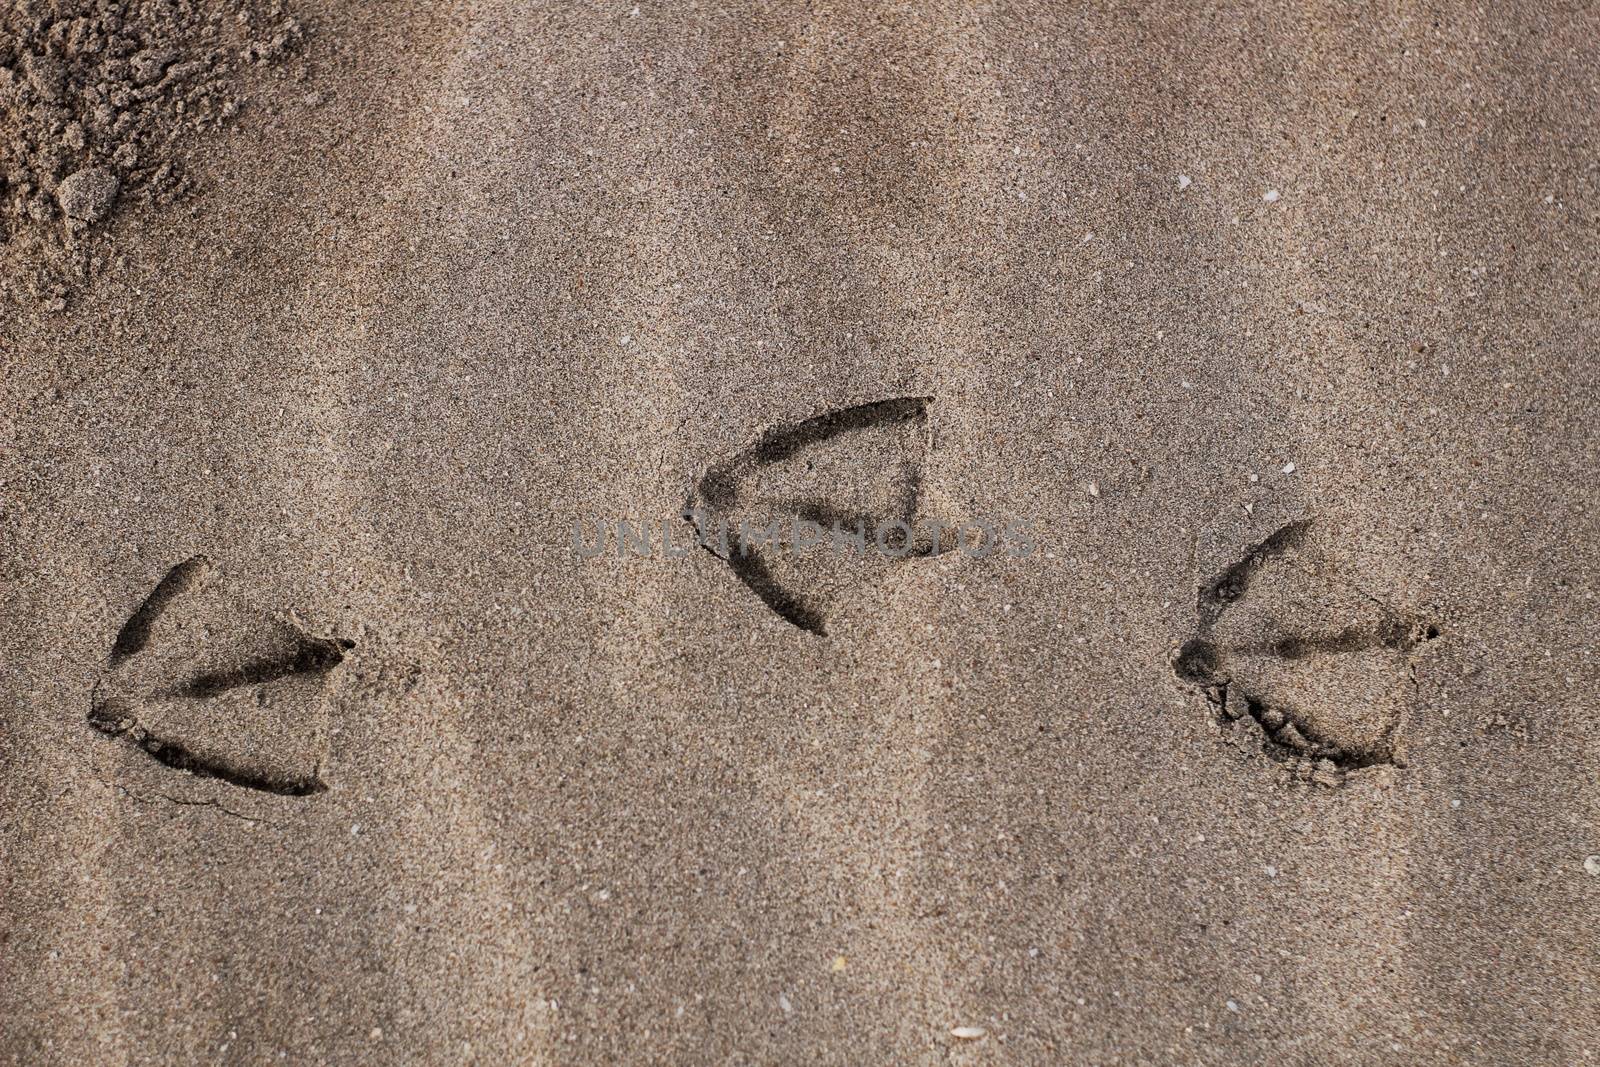 Gull footprints by the sand on the beach